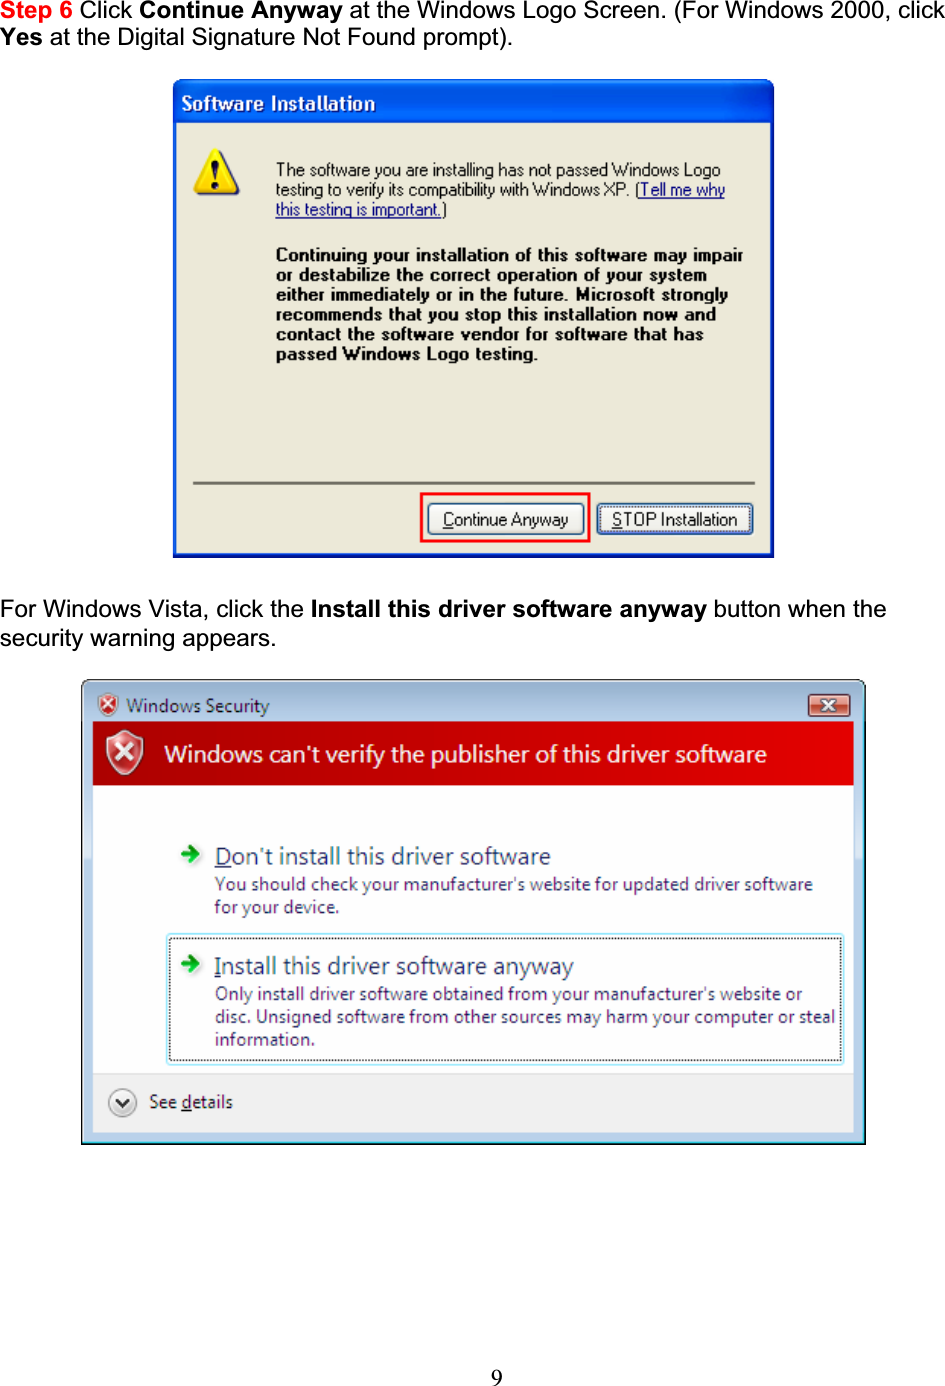 9Step 6 Click Continue Anyway at the Windows Logo Screen. (For Windows 2000, clickYes at the Digital Signature Not Found prompt).For Windows Vista, click the Install this driver software anyway button when thesecurity warning appears.